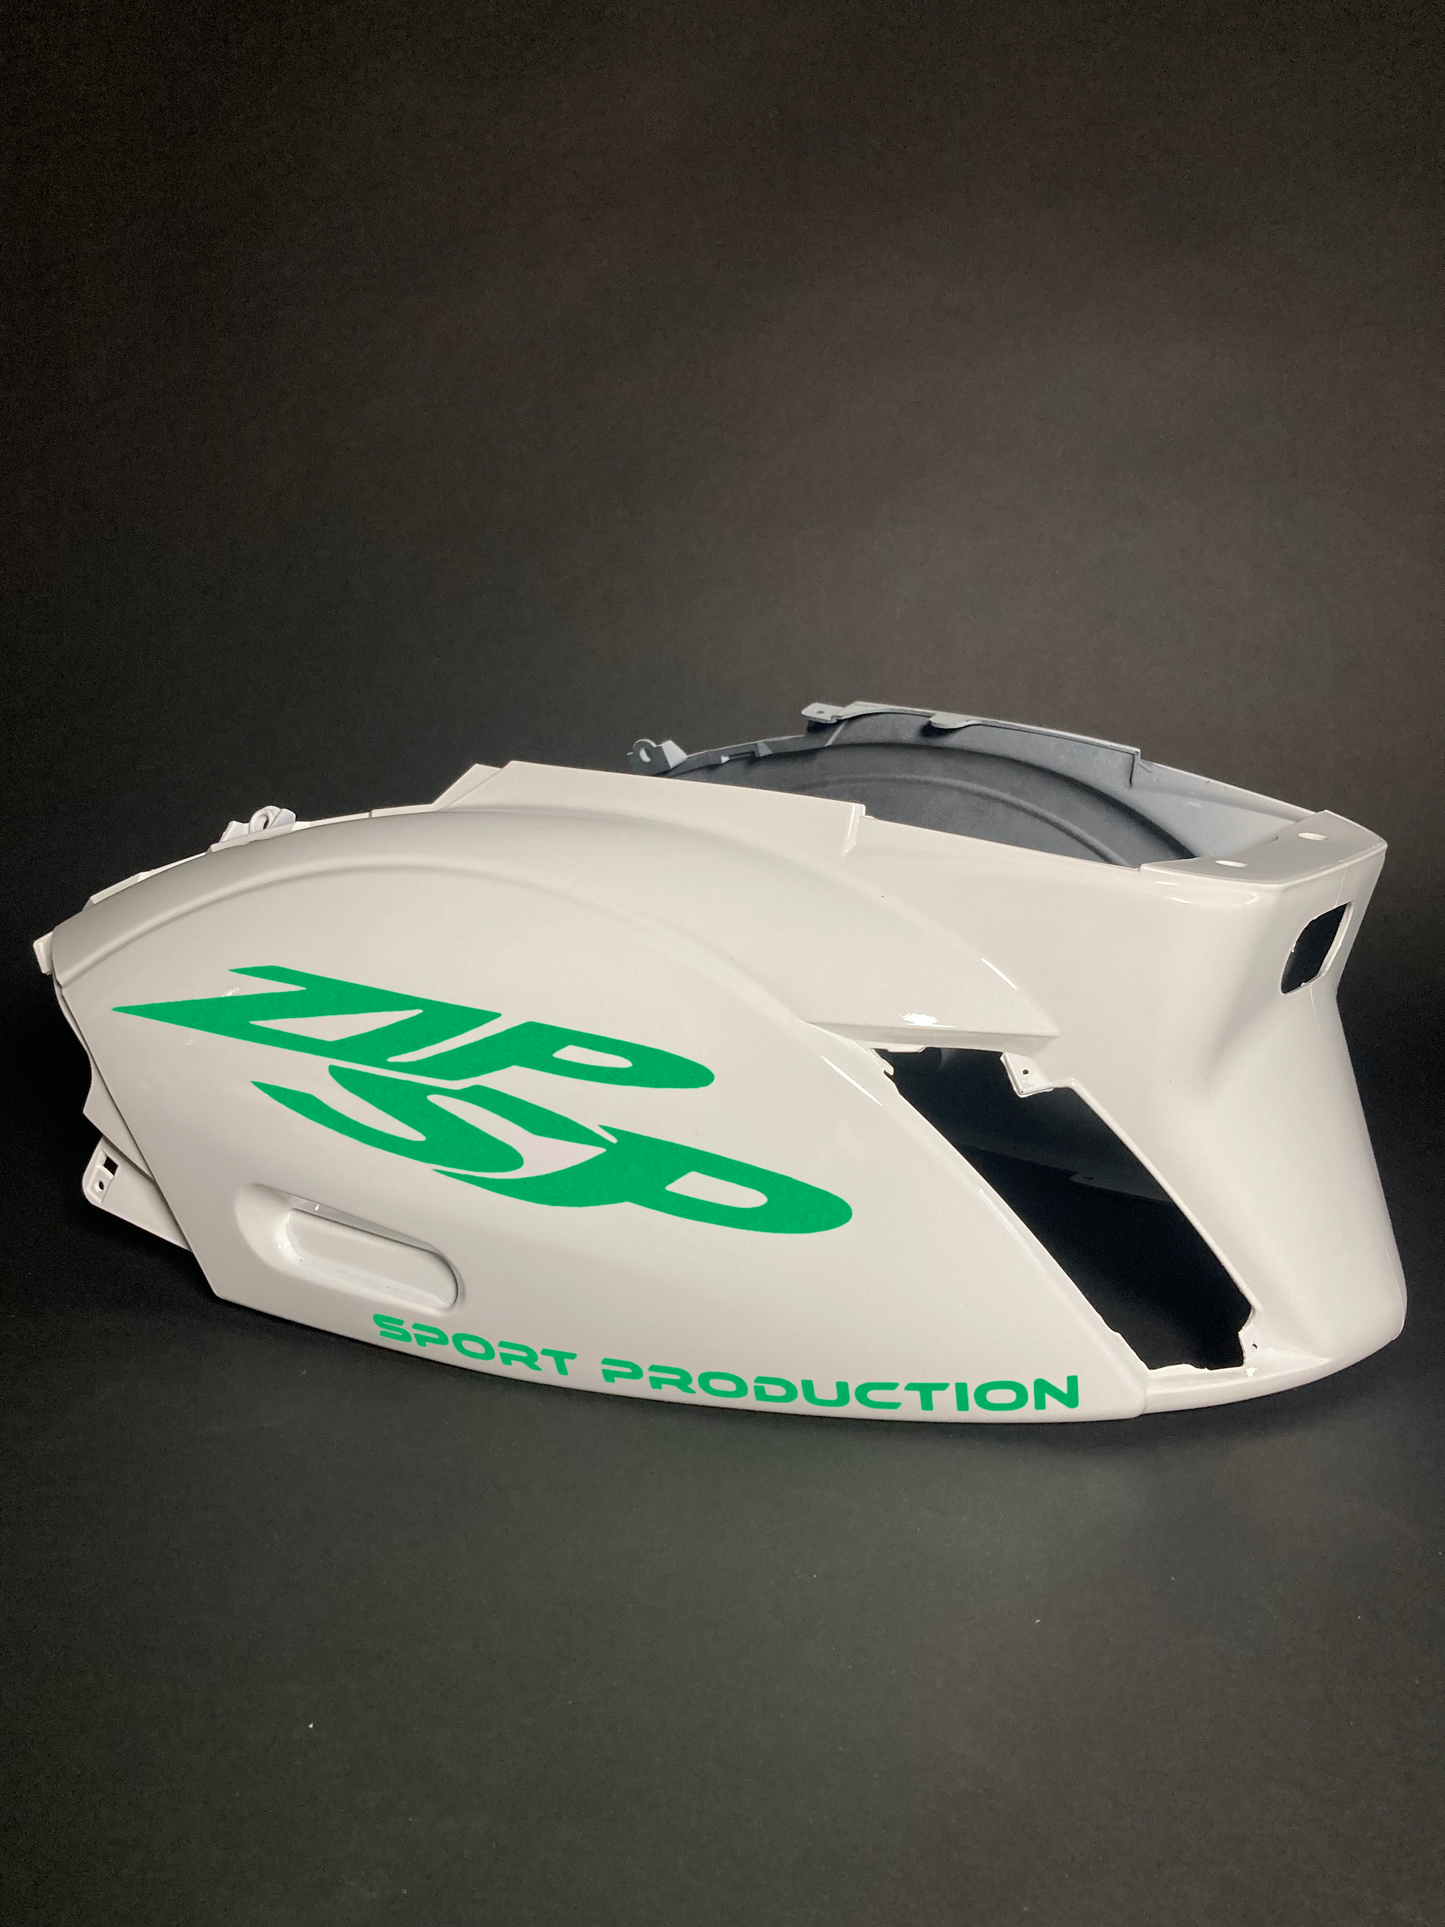 Zip Sports Production | Green